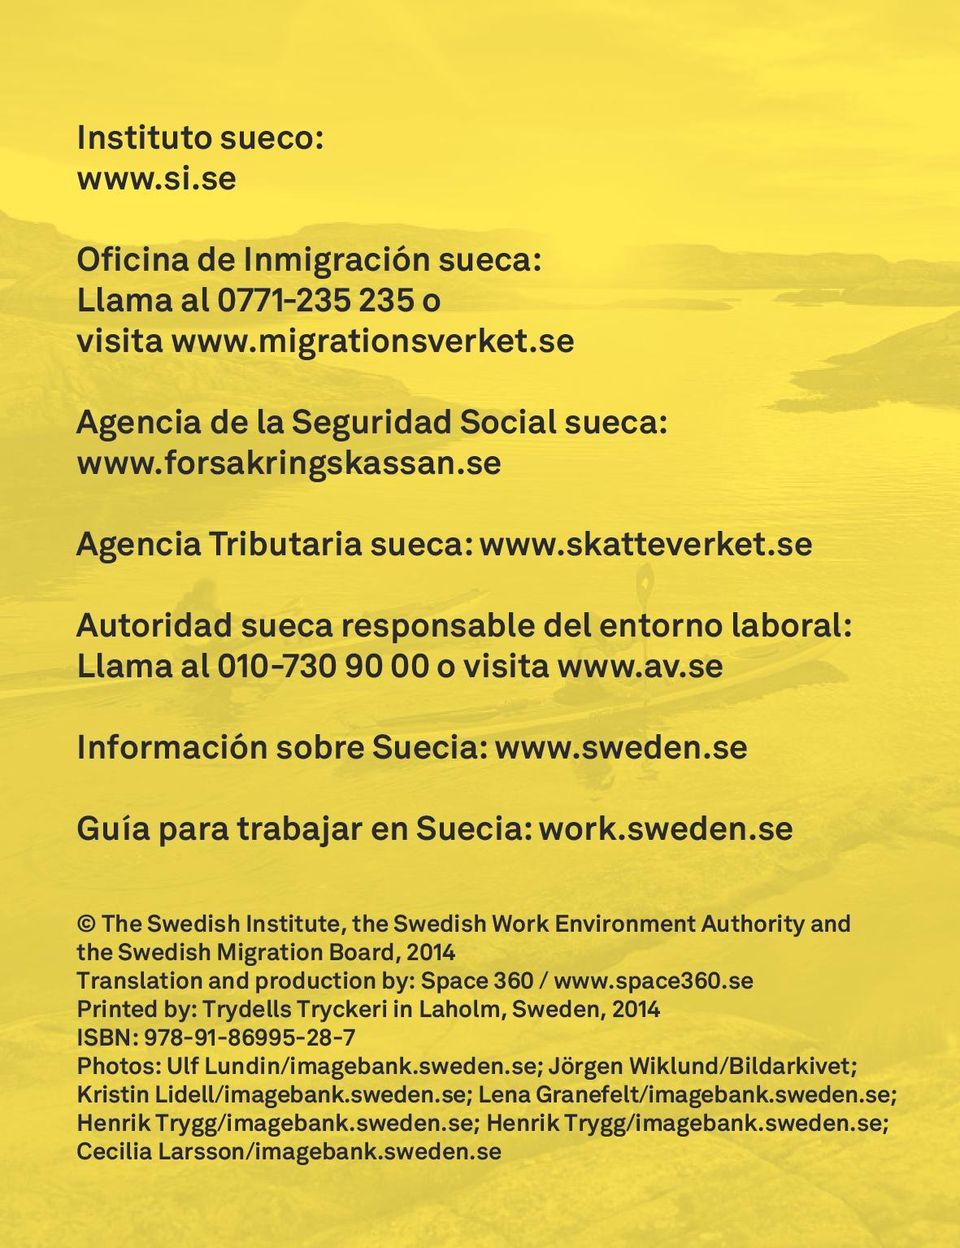 se Guía para trabajar en Suecia: work.sweden.se The Swedish Institute, the Swedish Work Environment Authority and the Swedish Migration Board, 2014 Translation and production by: Space 360 / www.